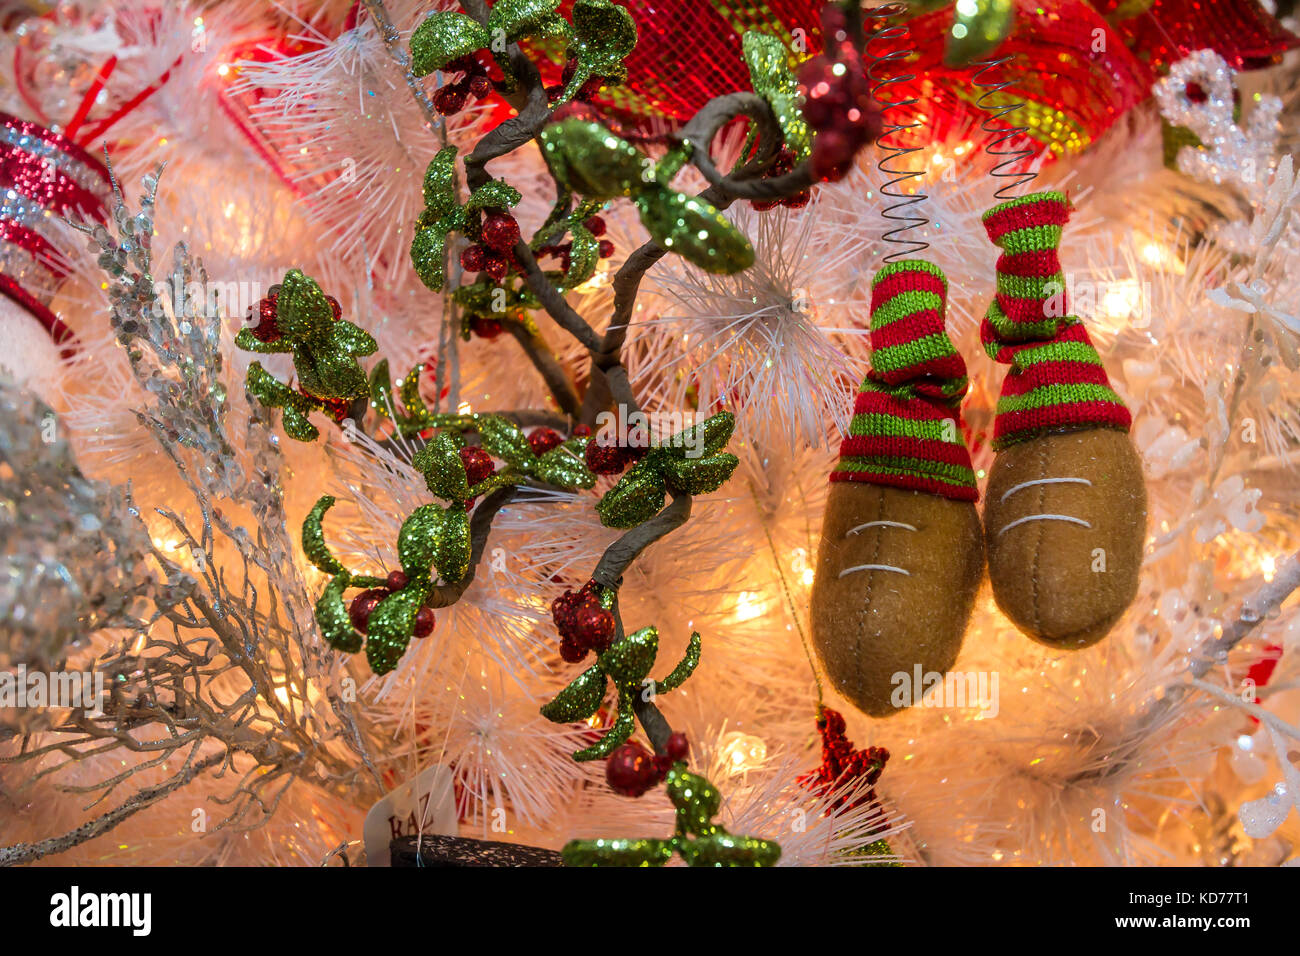 White, red and green Christmas decorations. Stock Photo